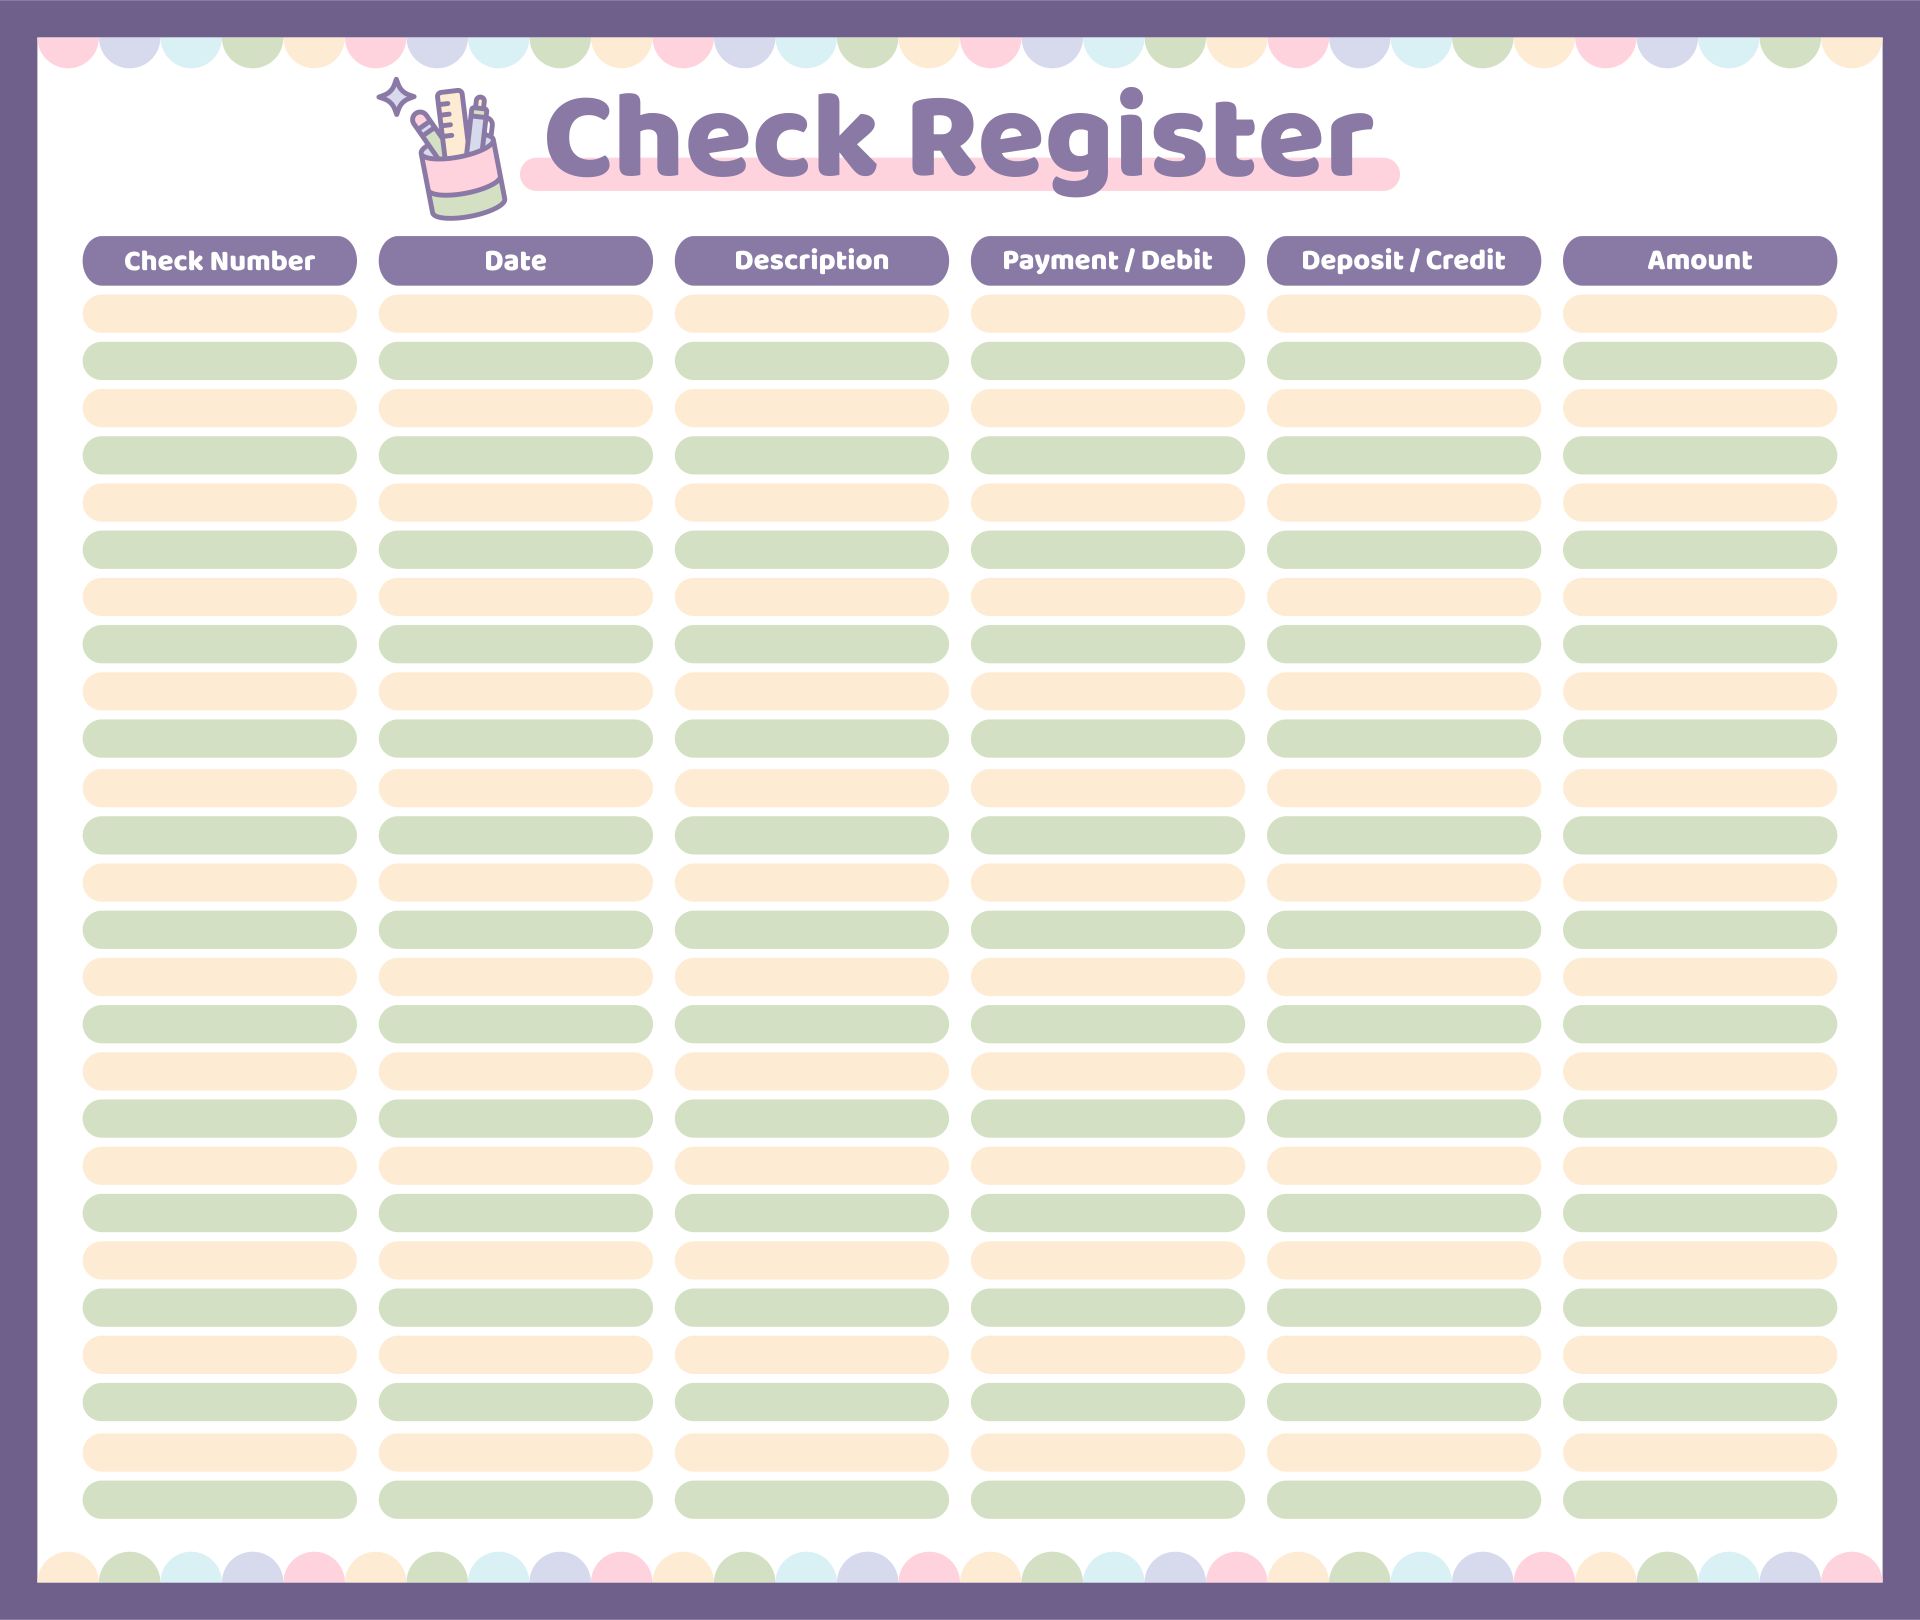 7-best-images-of-check-register-full-page-printable-free-printable-check-register-printable